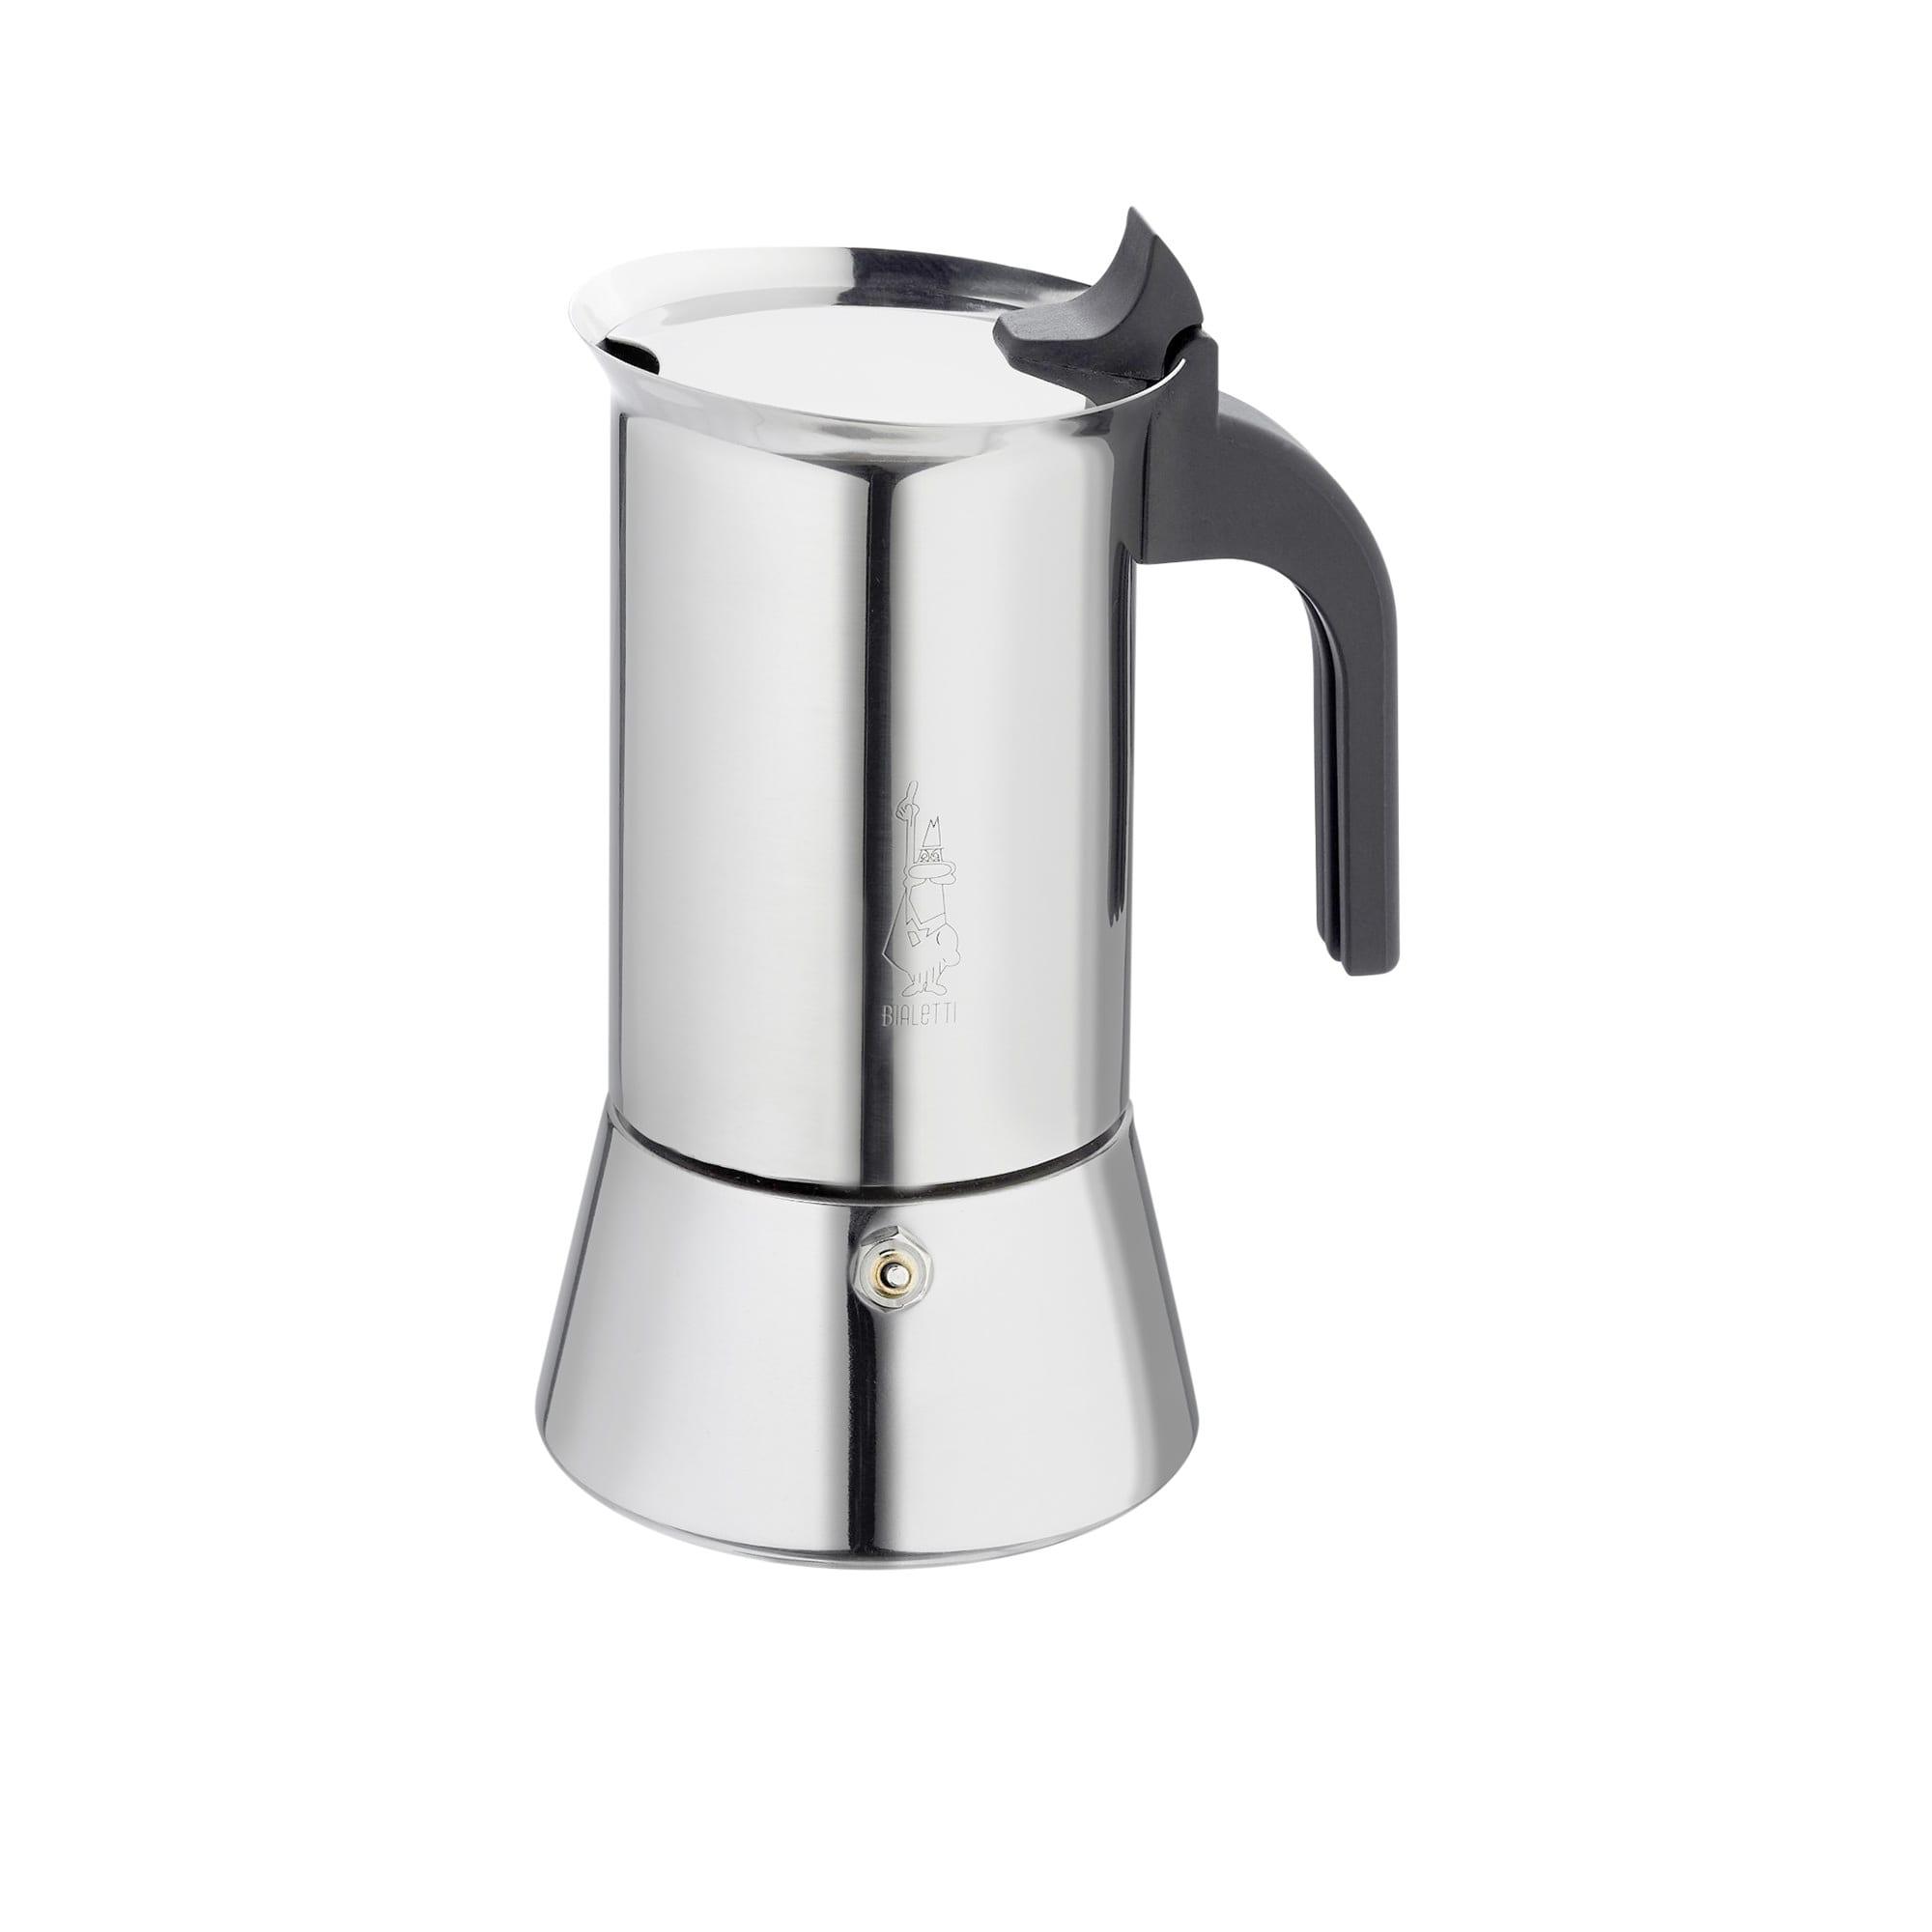 Bialetti Venus Stainless Steel Induction Espresso Maker 6 Cup Image 3